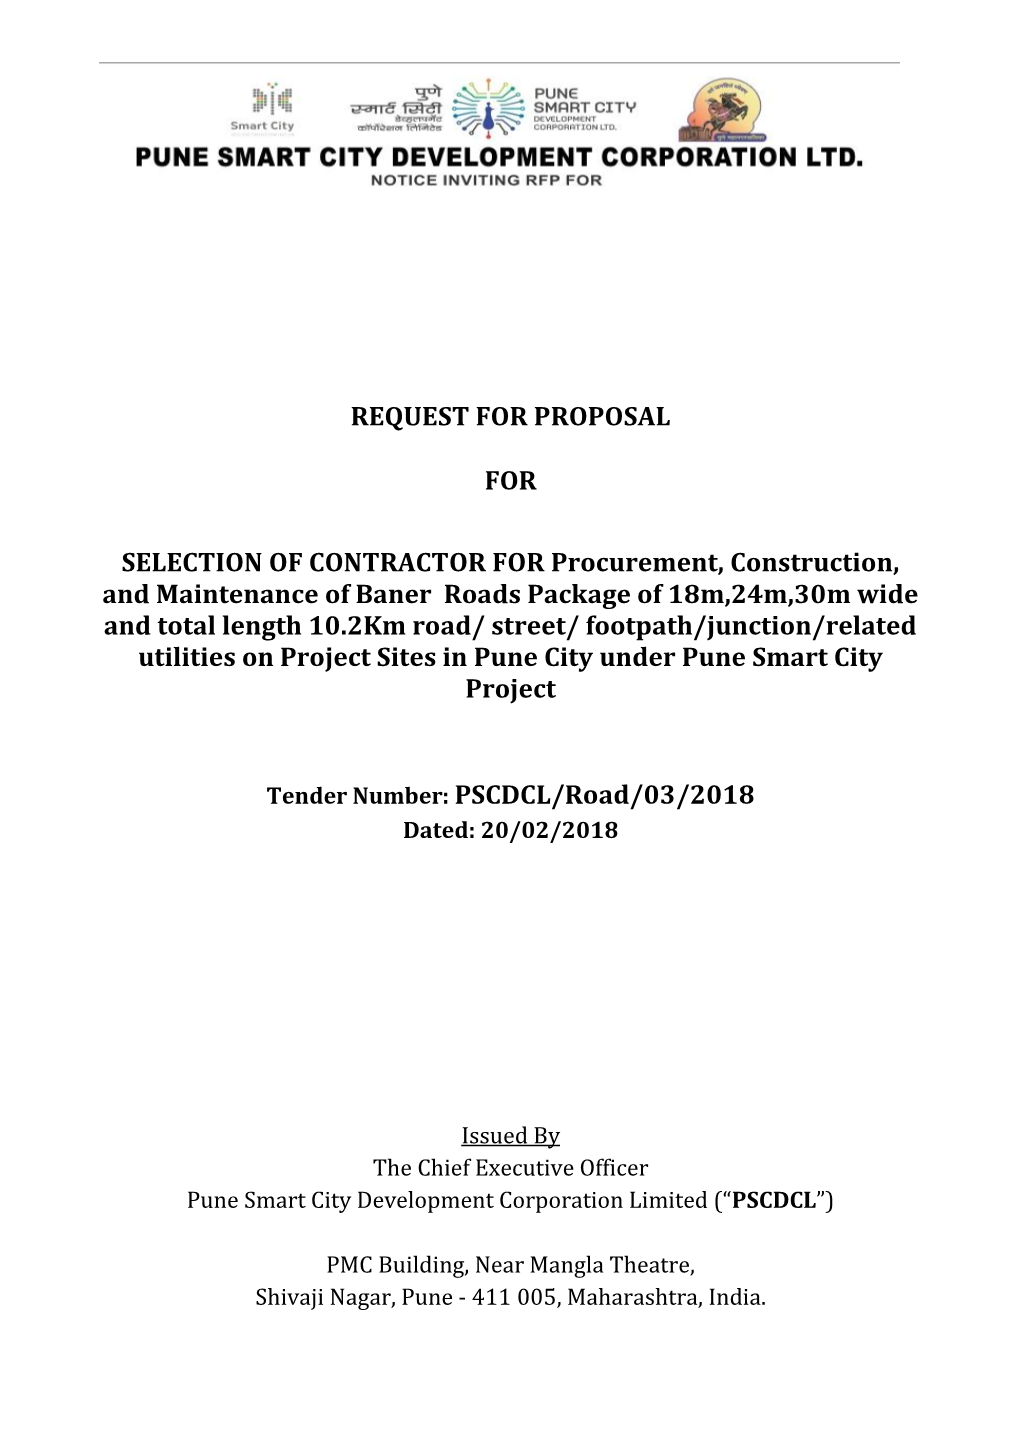 Request for Proposal for Selection of Contractor